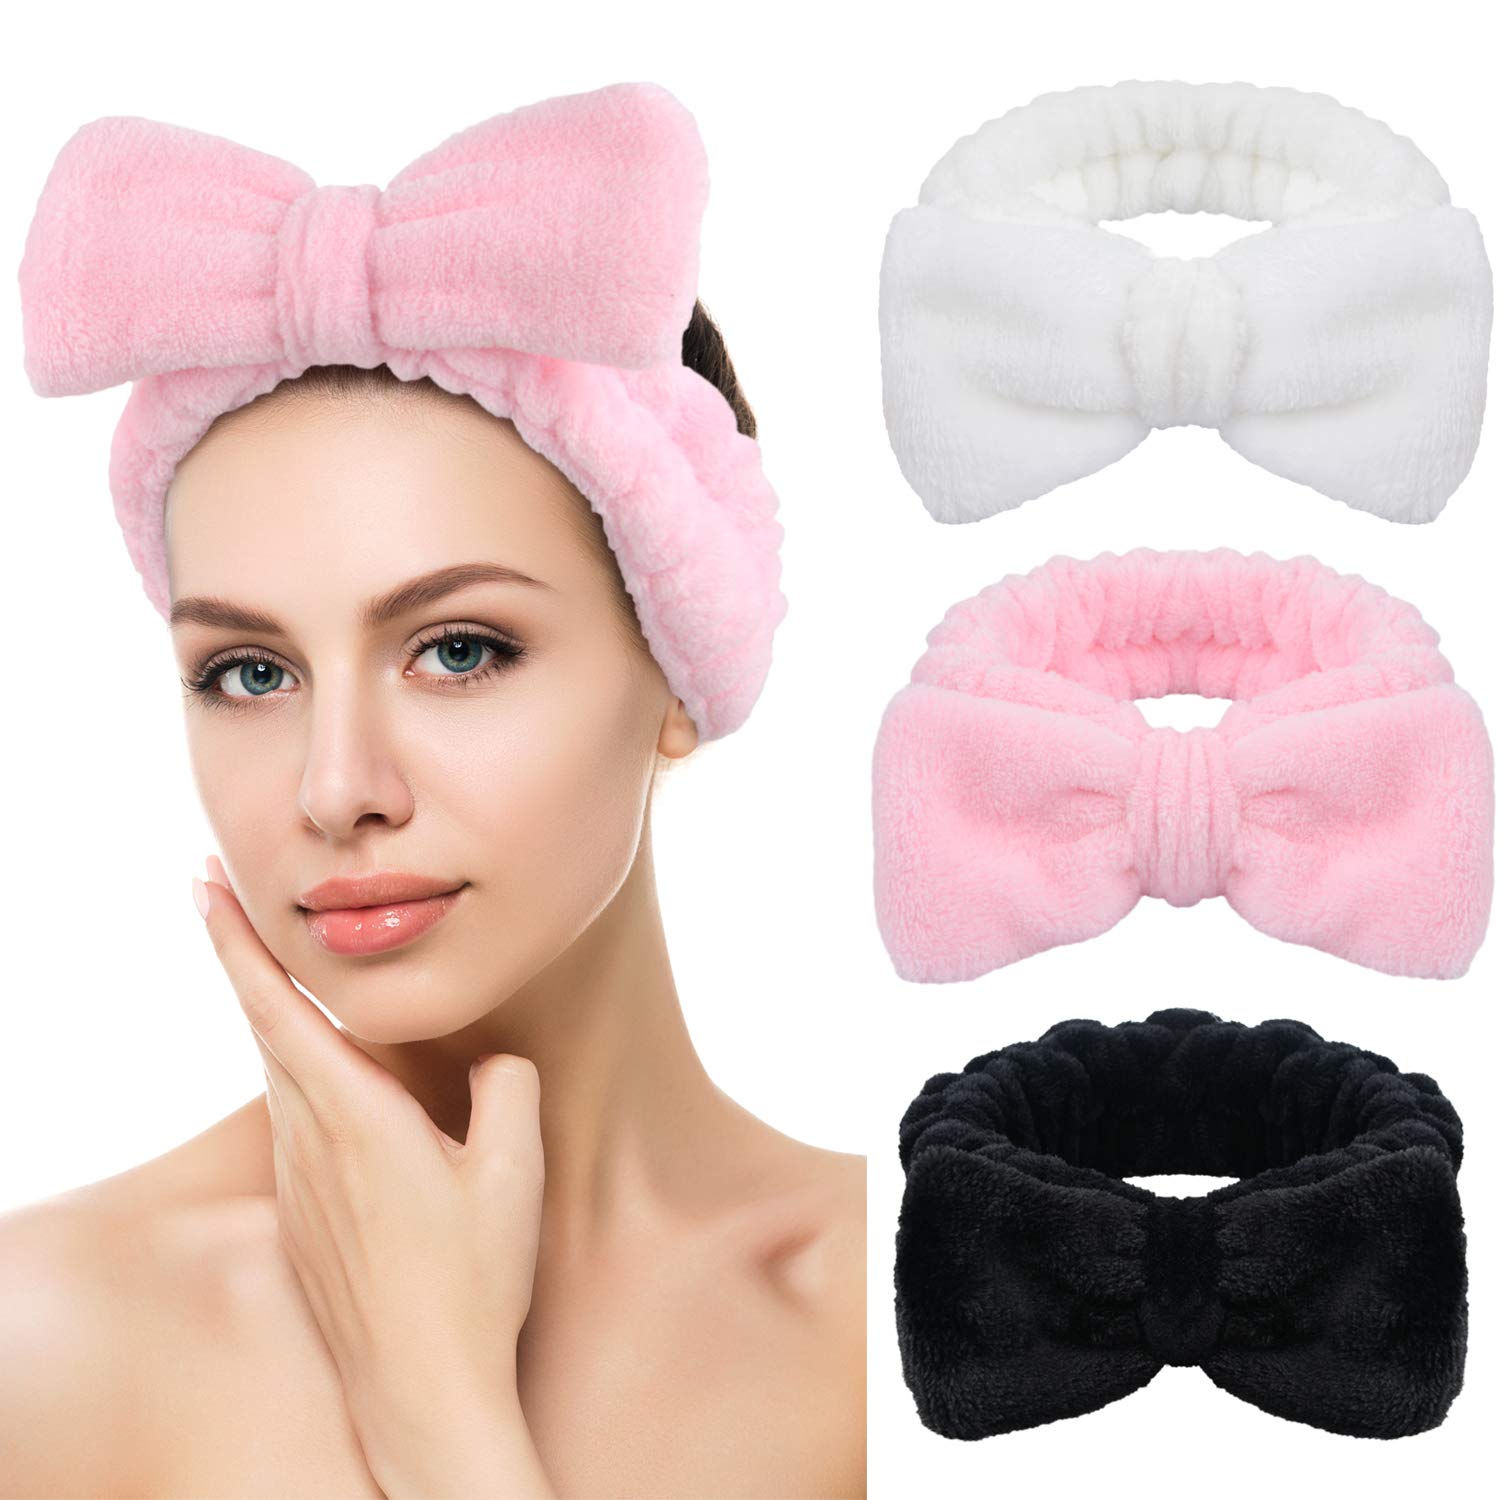 SINLAND Cute Hair Bands Spa Headband for Washing Face Makeup Headband For  Women 3Pack assorted2